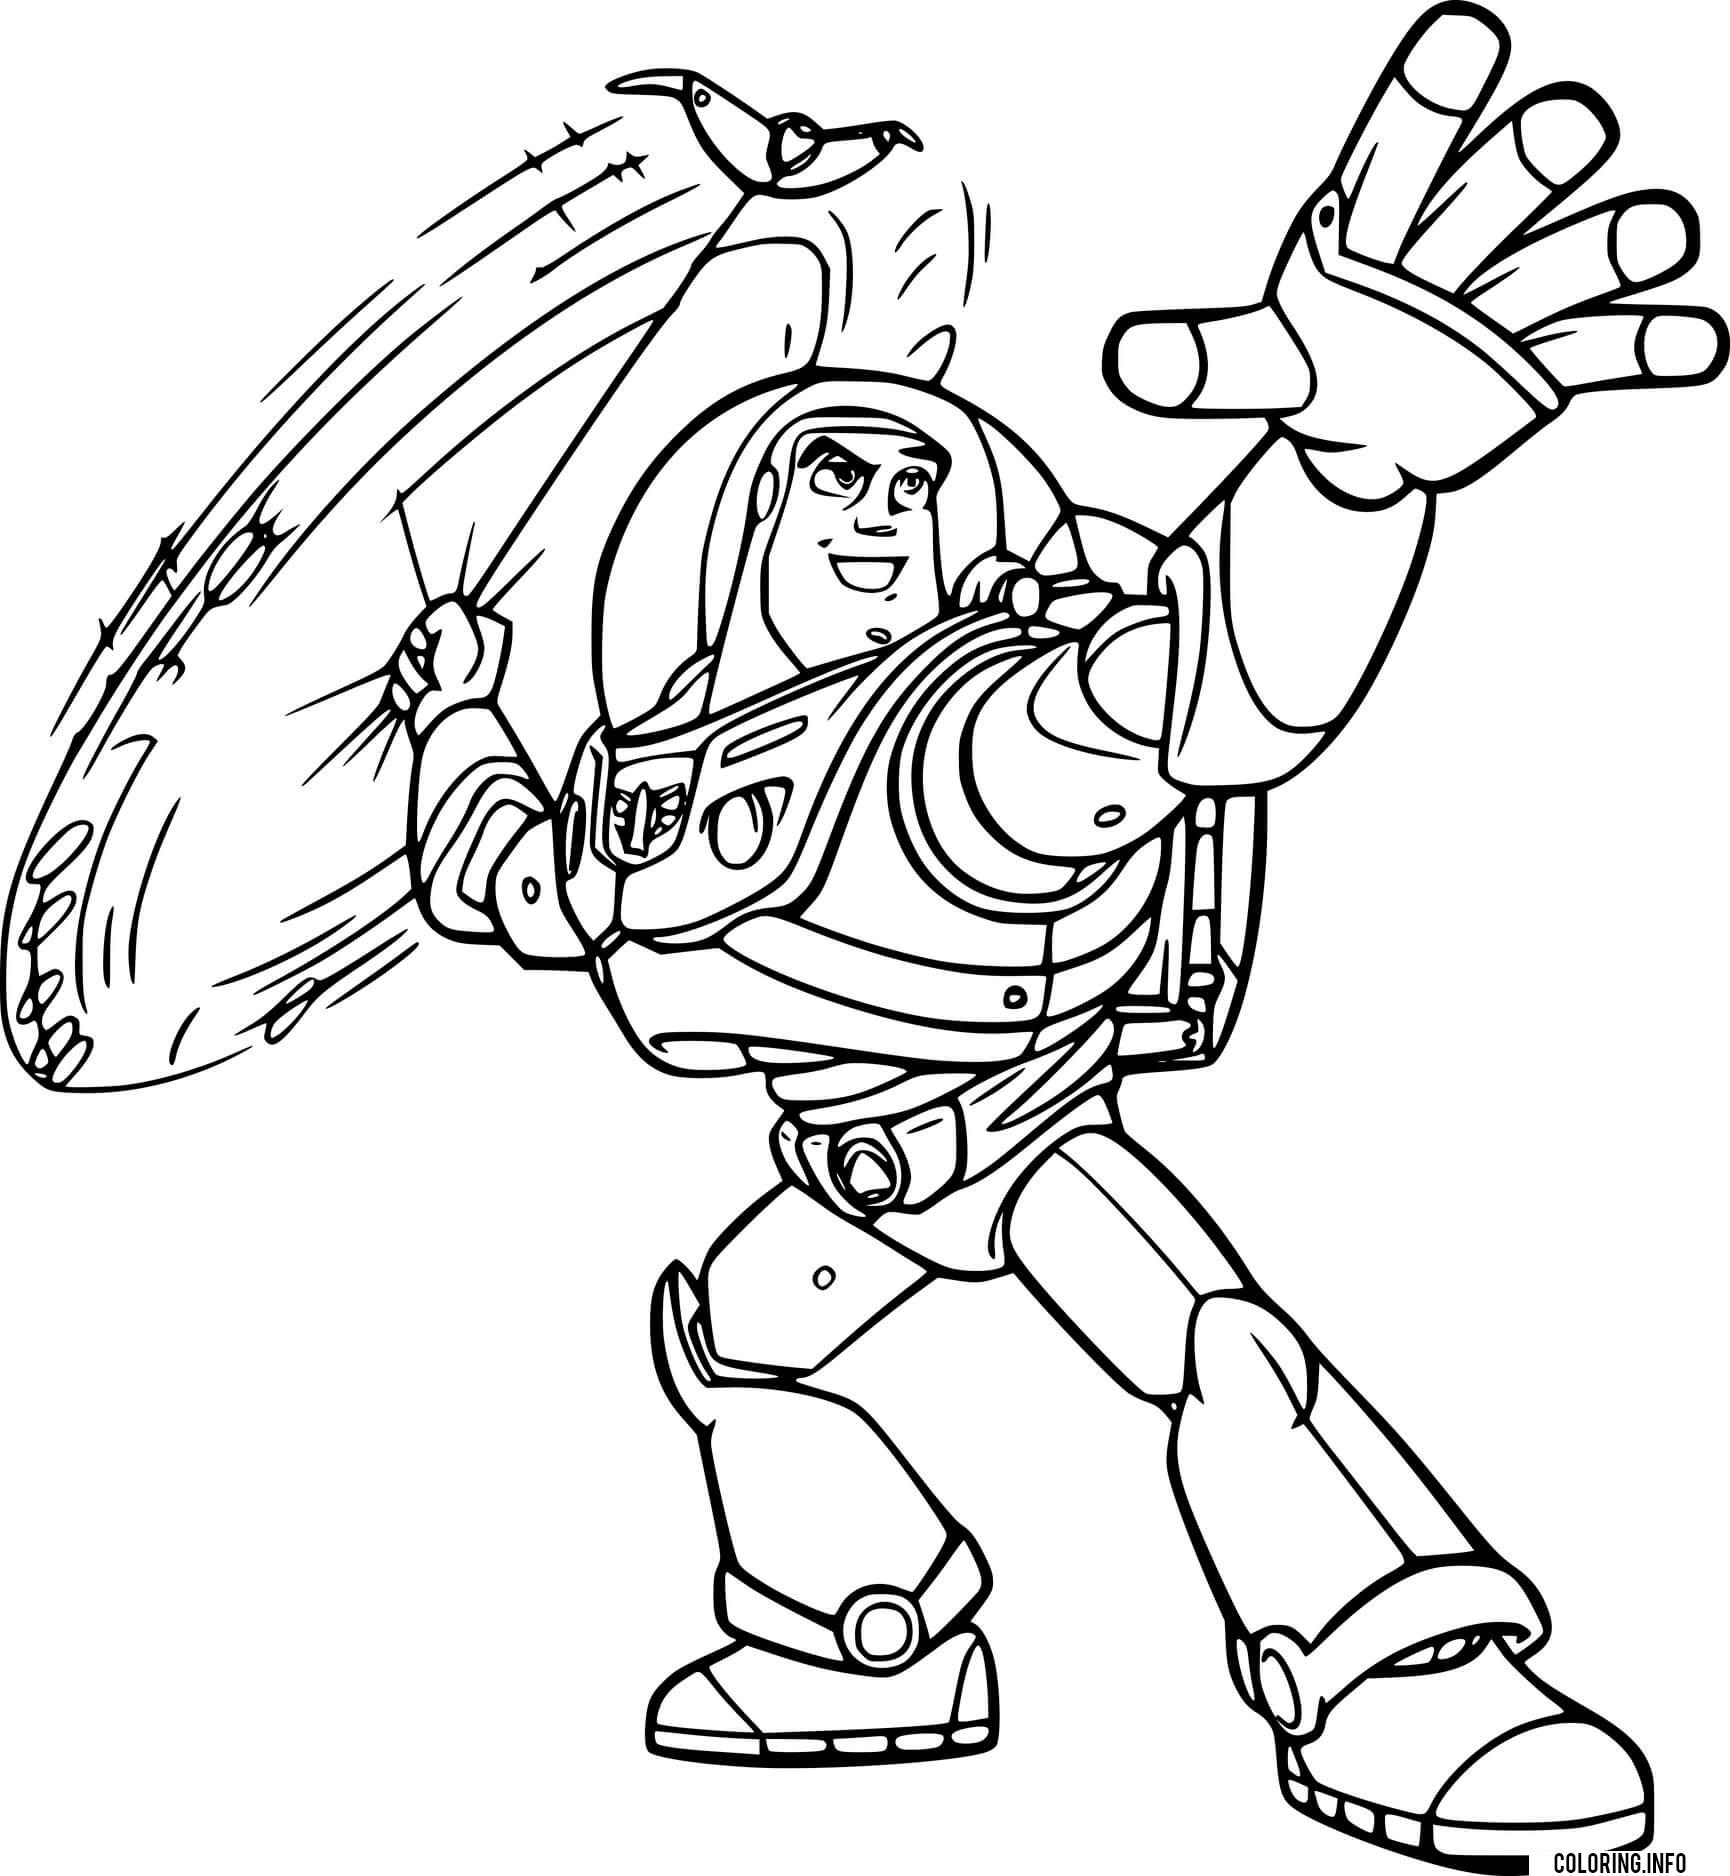 Buzz Lightyear Throwing coloring